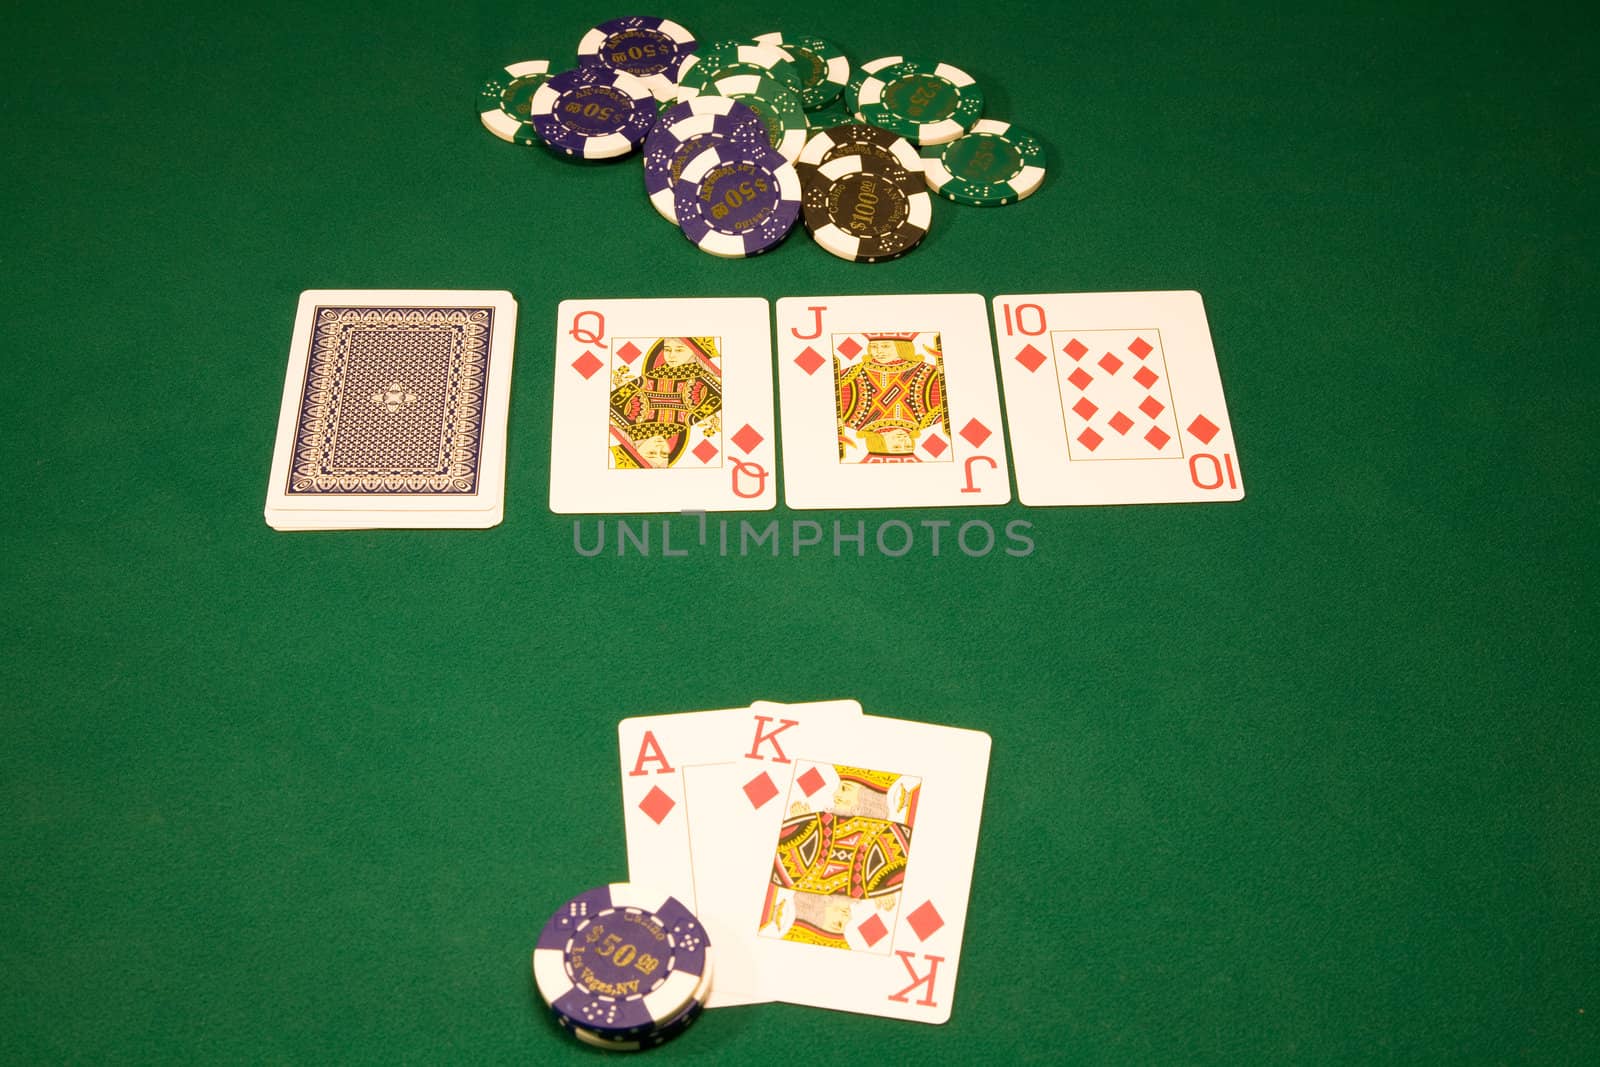 Royal flash in the poker on the green tabl